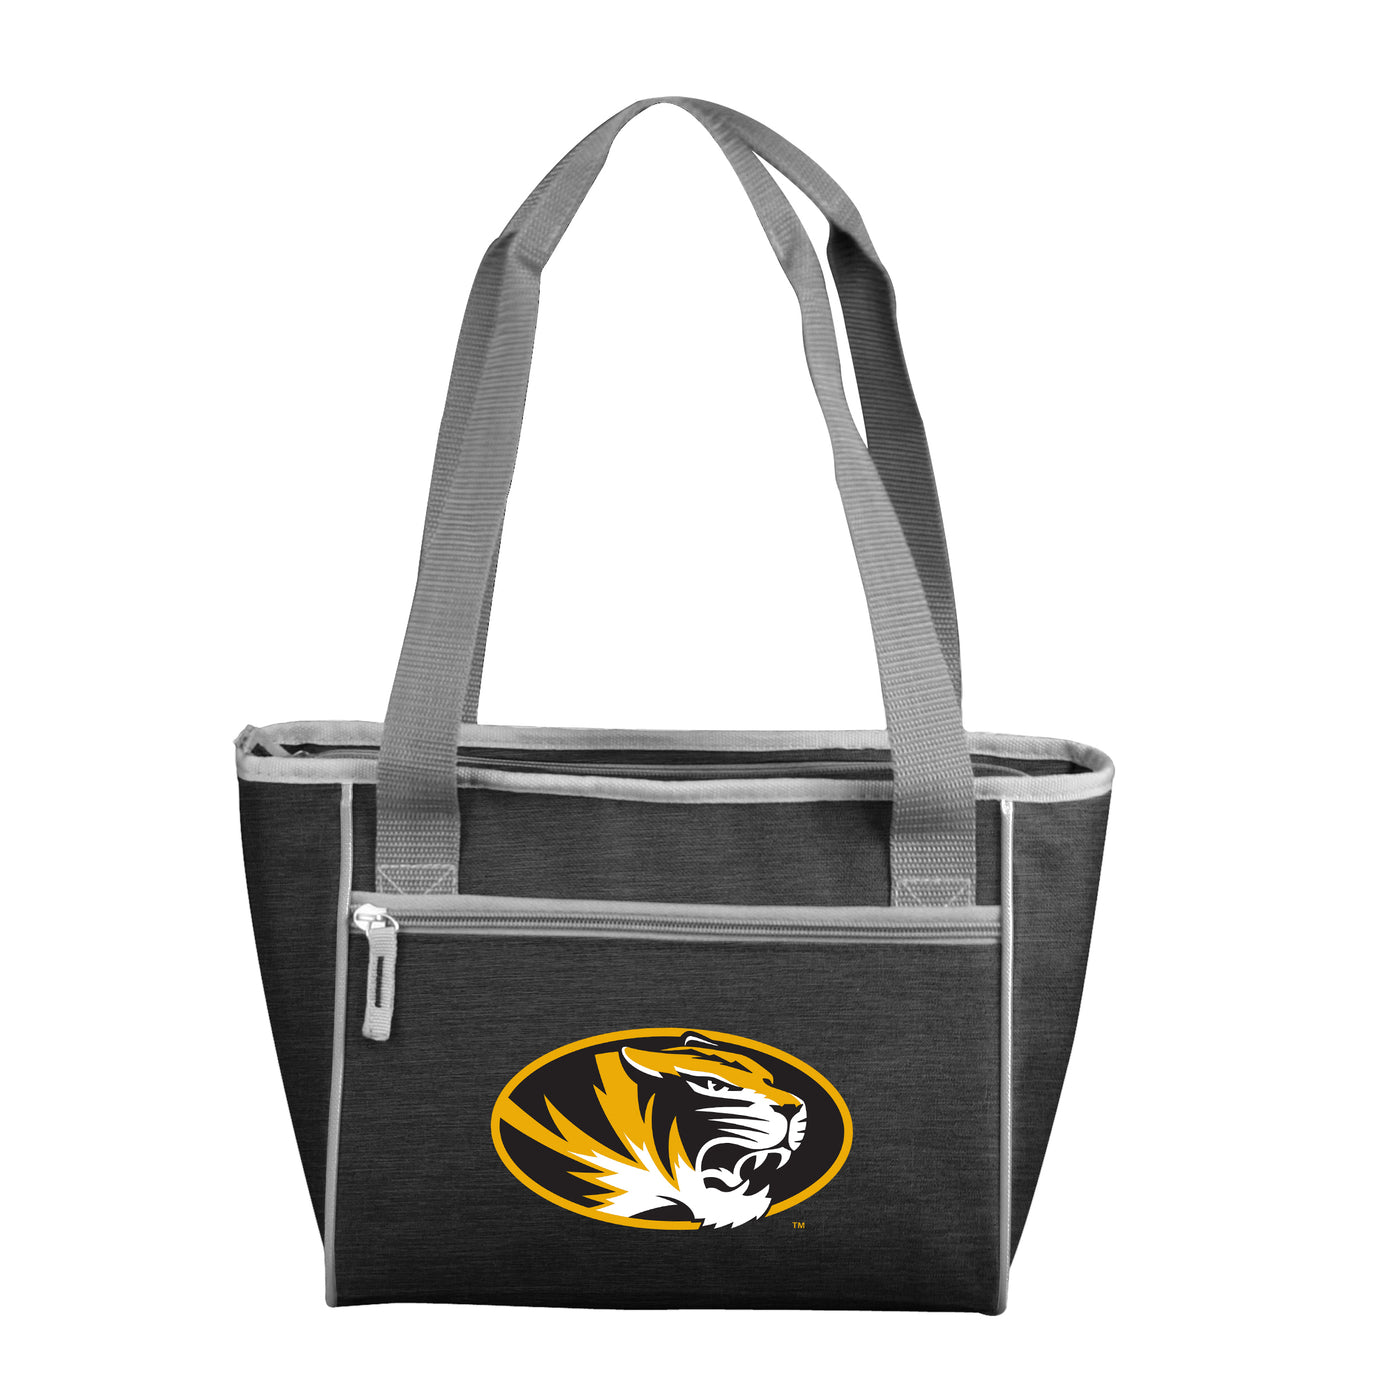 Missouri Crosshatch 16 Can Cooler Tote